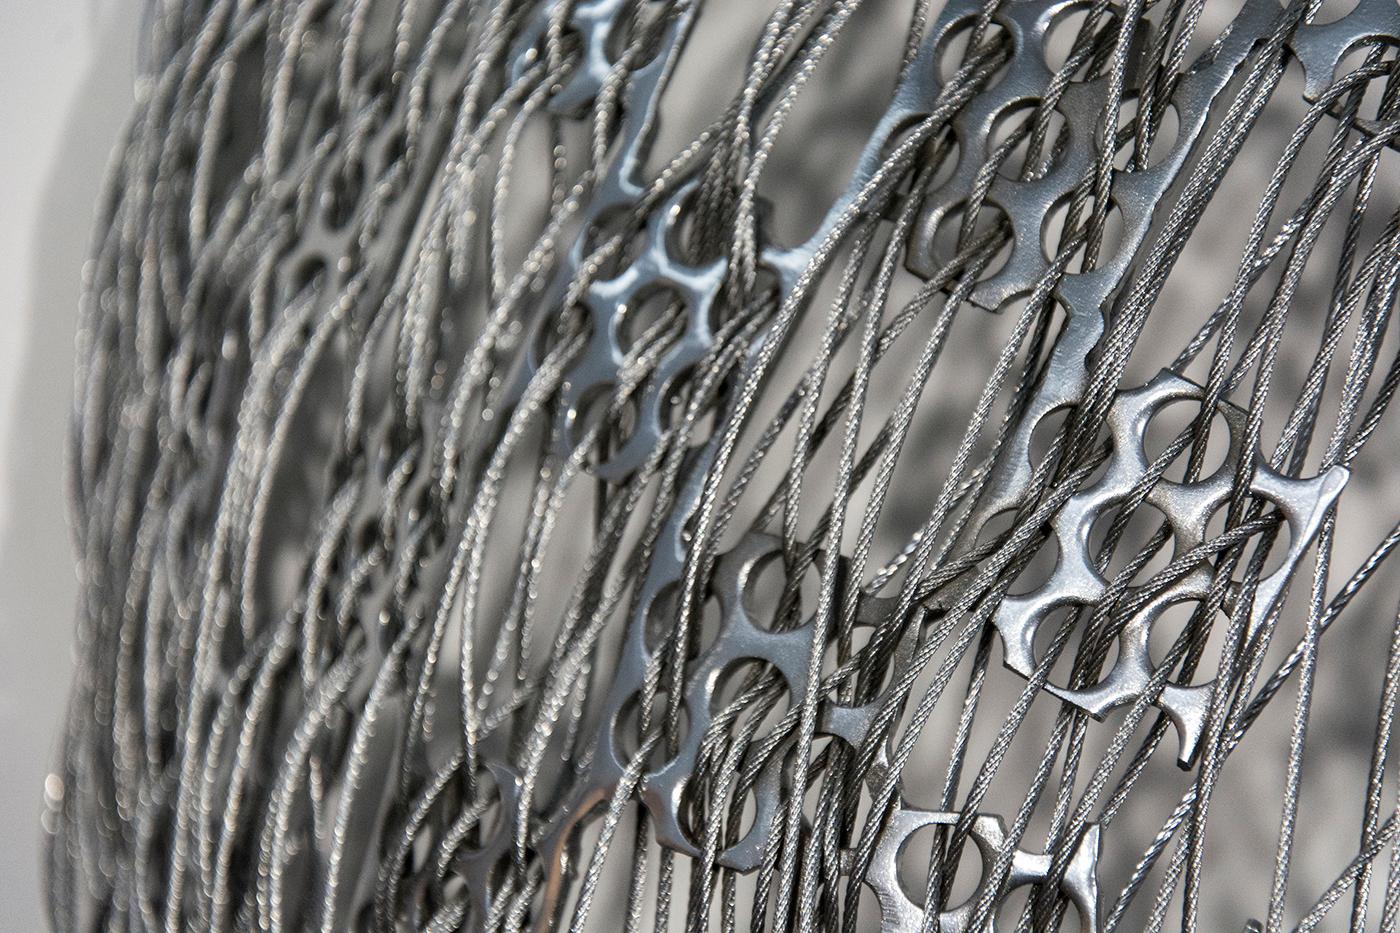 Tangled - silver, abstract human face, stainless steel and cable wall sculpture - Gray Figurative Sculpture by Dale Dunning